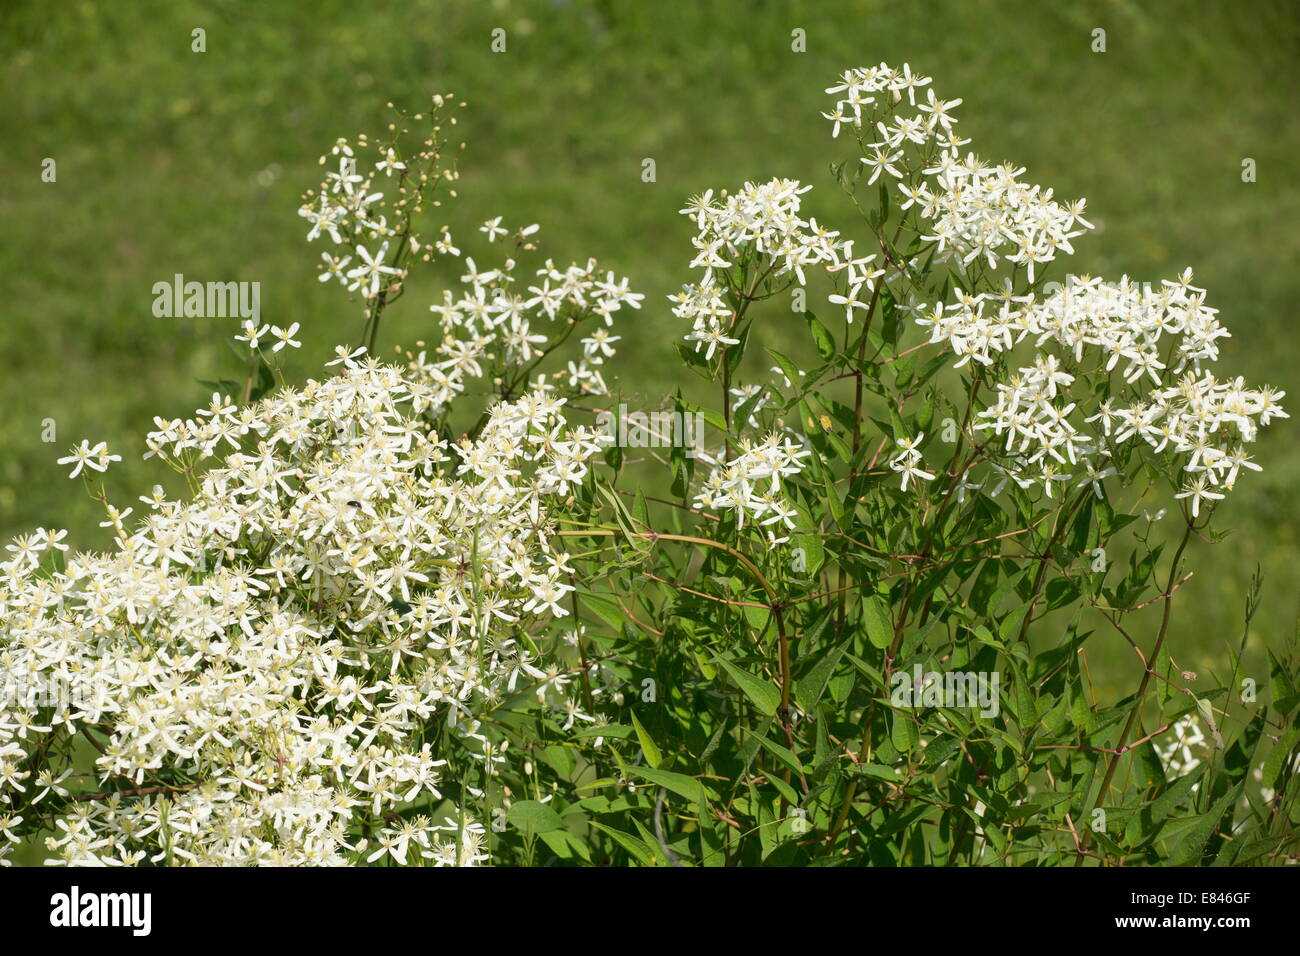 Upright clematis, Clematis recta, in flower in transylvanian grasslands.  Romania Stock Photo